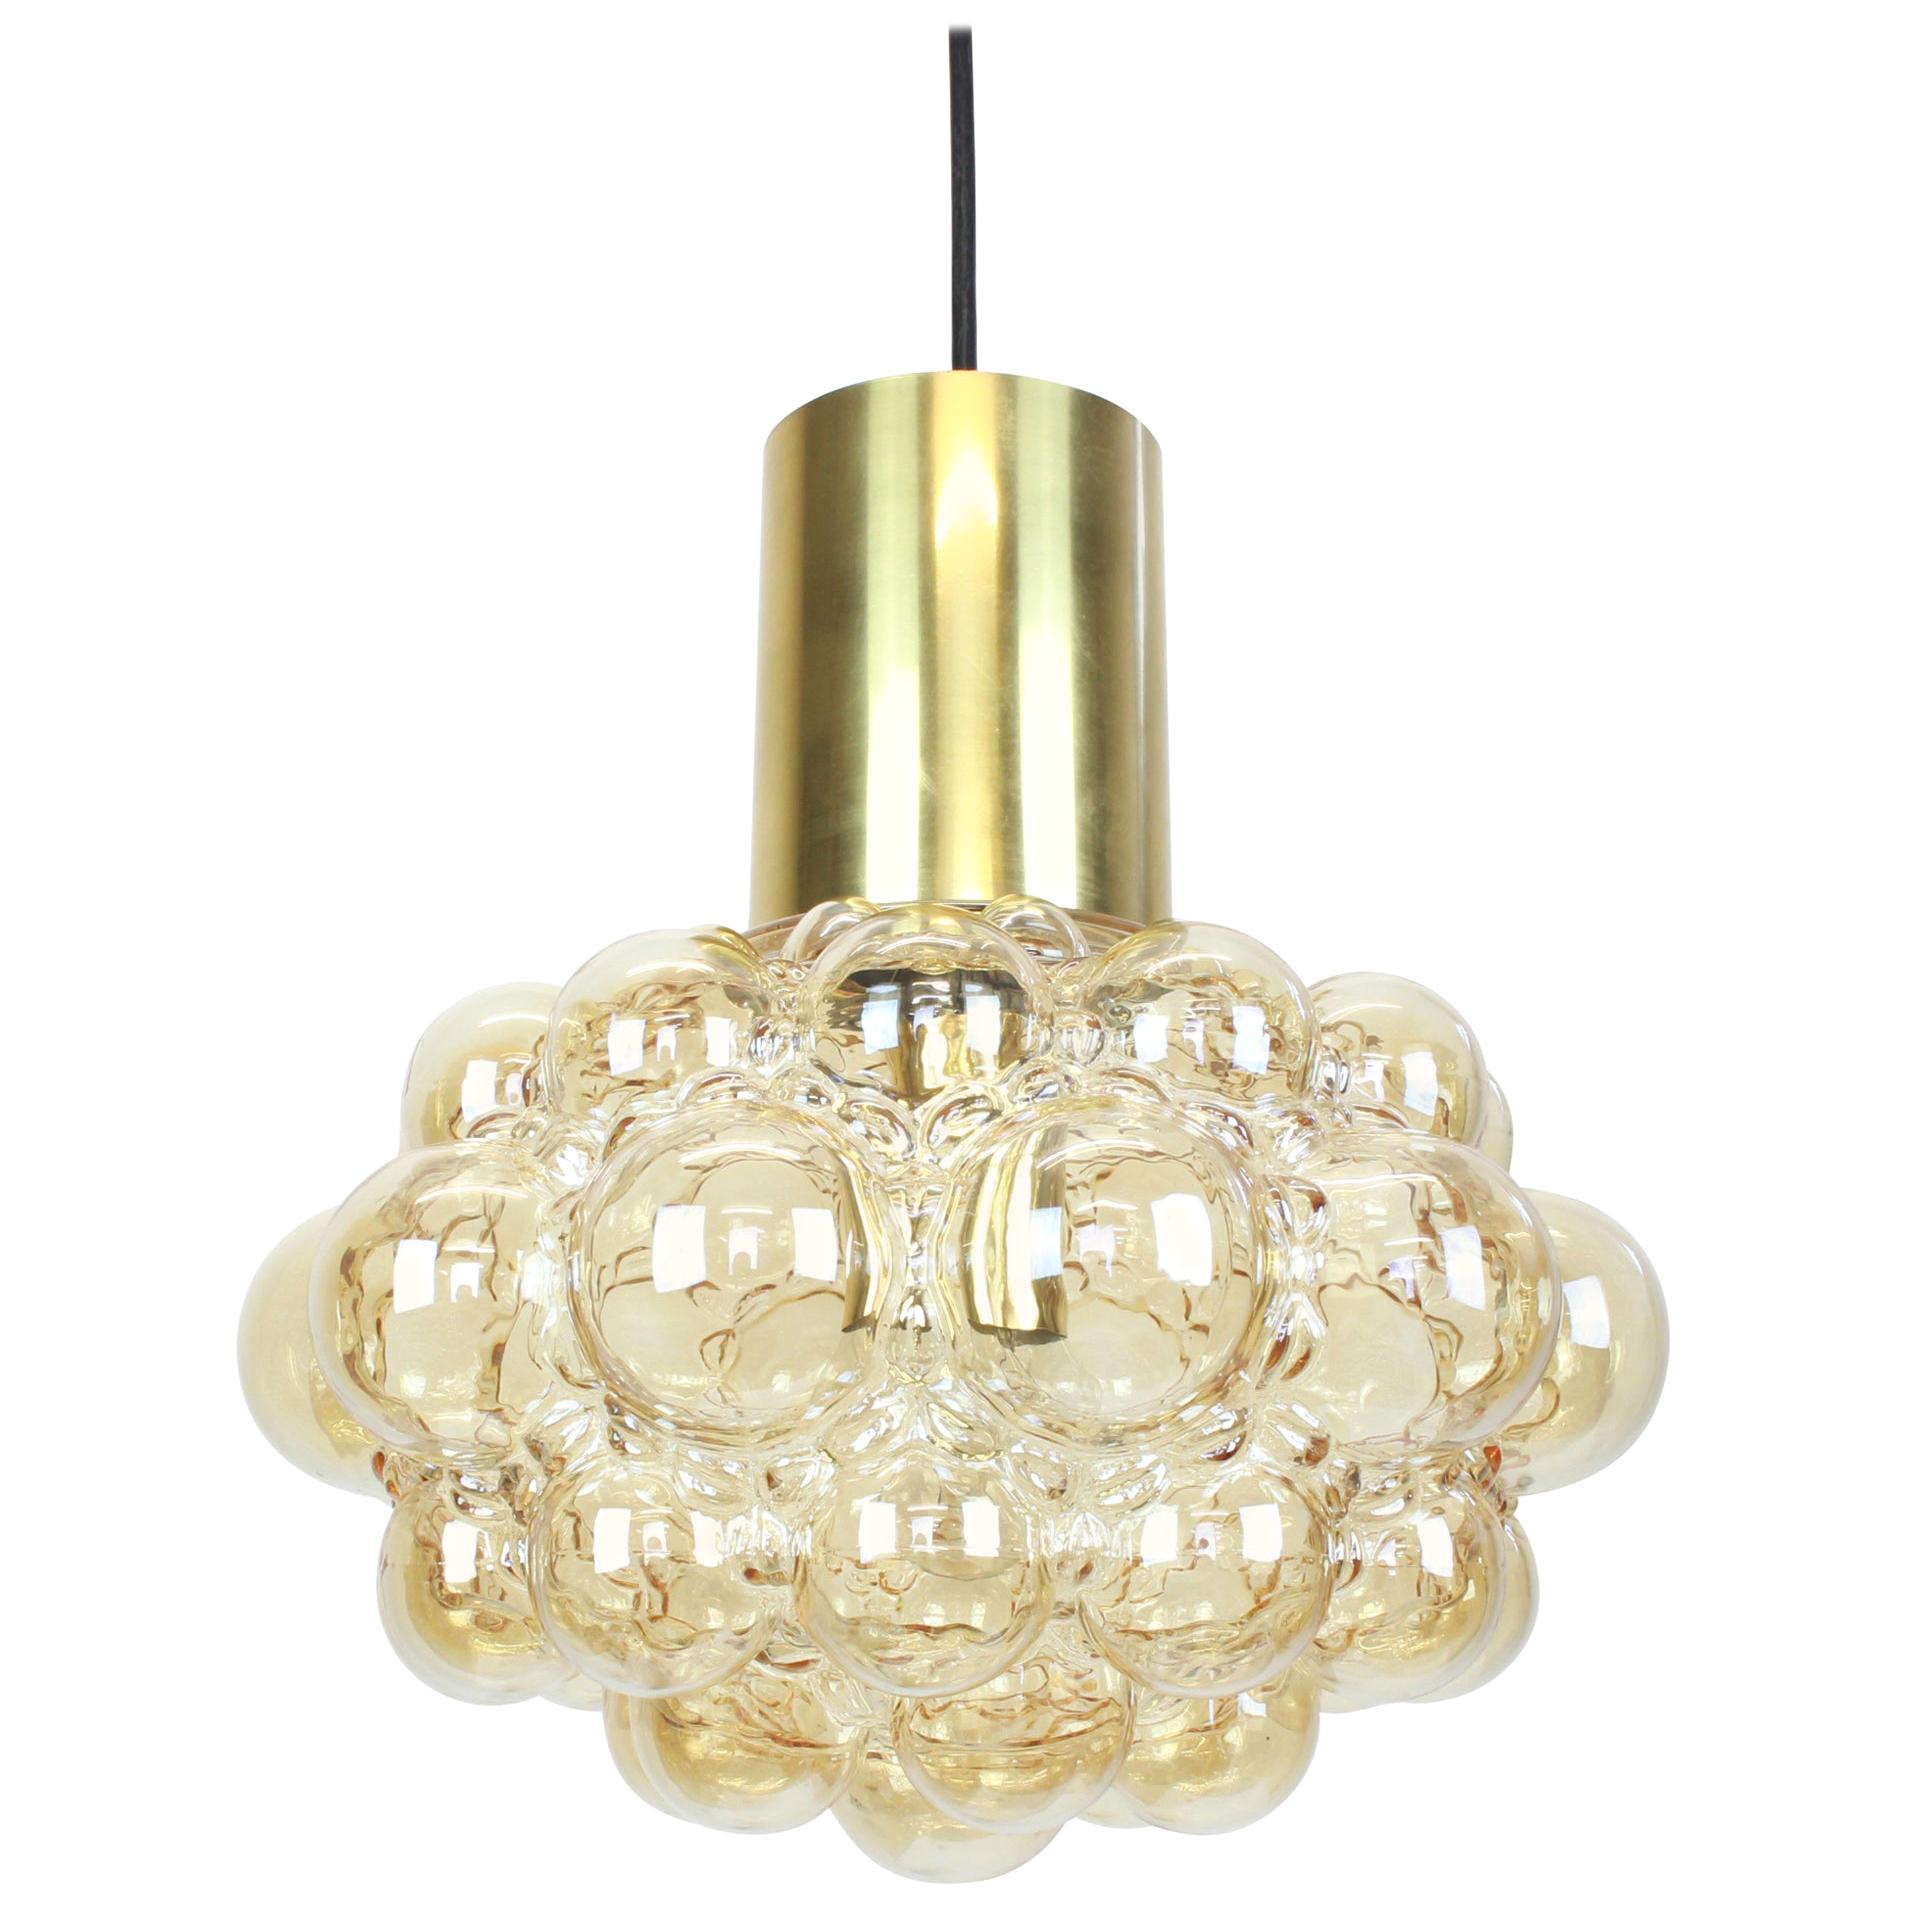 A large round smoke tone bubble glass pendant designed by Helena Tynell for Limburg, manufactured in Germany, circa 1970s.

Sockets: Needs 1 x E27 standard bulb with 100W max each and compatible with the US/UK/ etc. standards
Drop rod can be